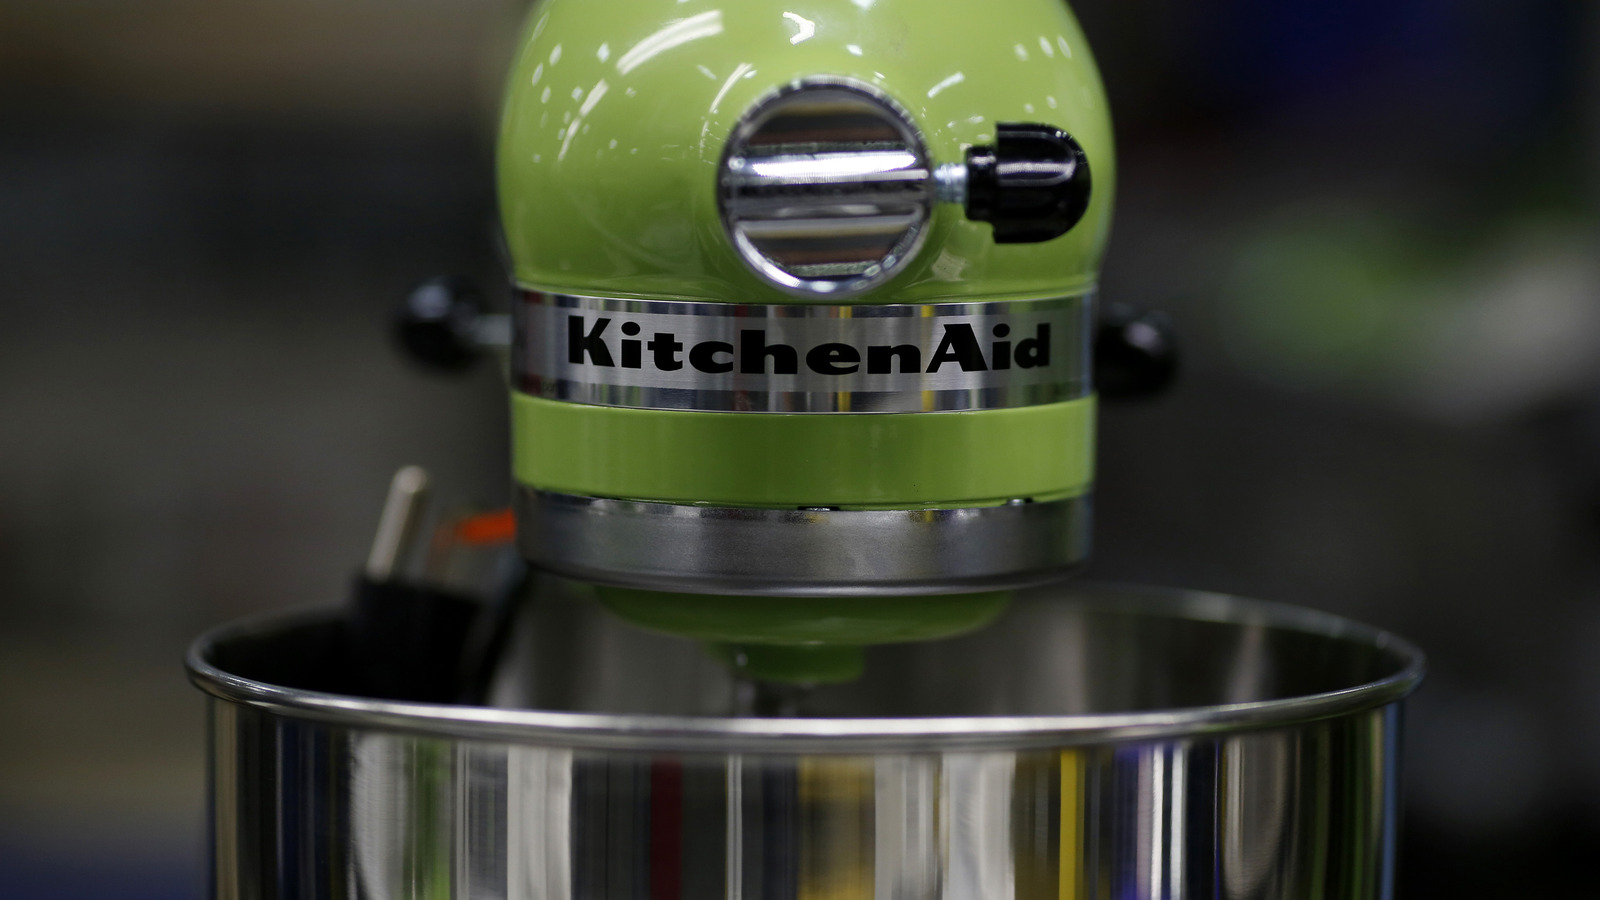 Your KitchenAid Stand Mixer Is Leaking Oil: Now What?